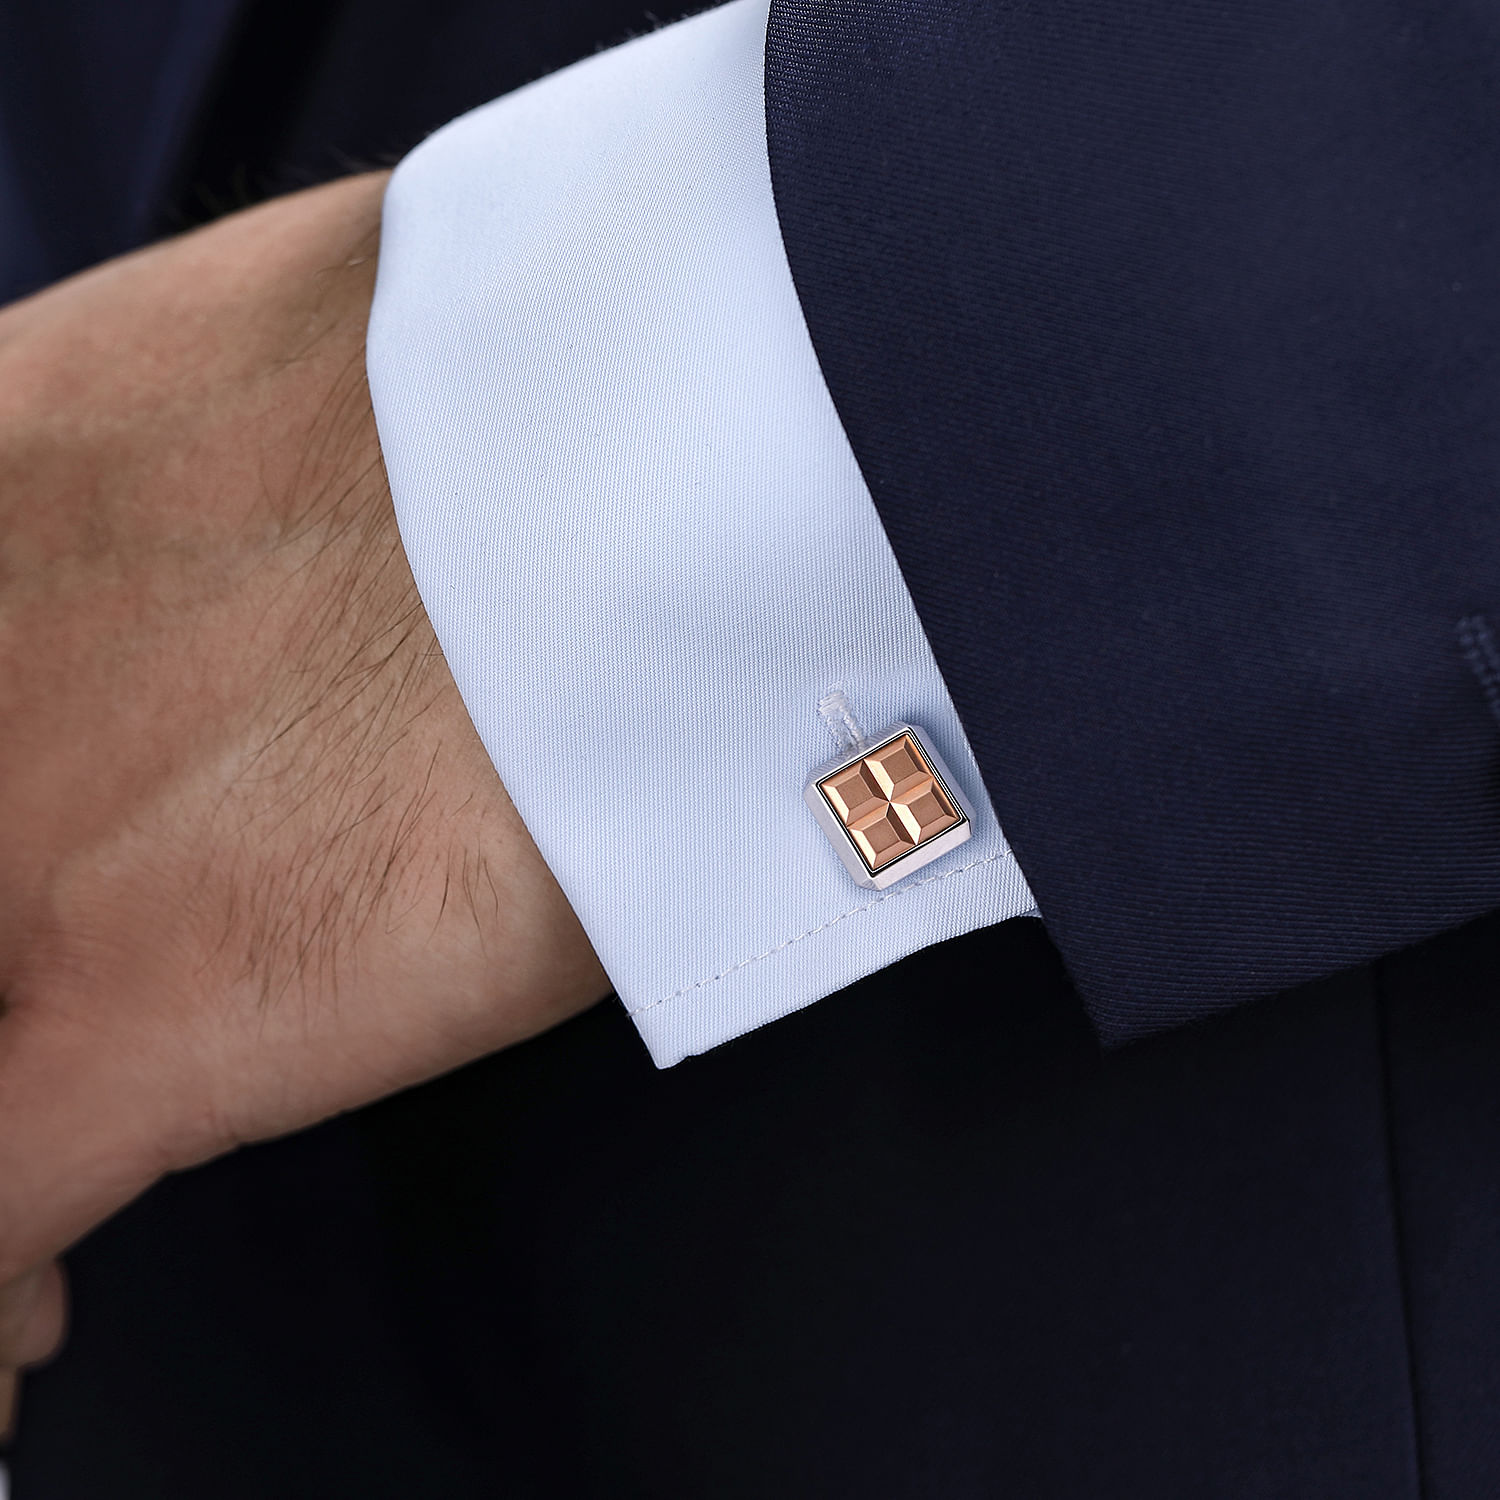 Sterling Silver Square Cufflinks with 14K Rose Gold Squares